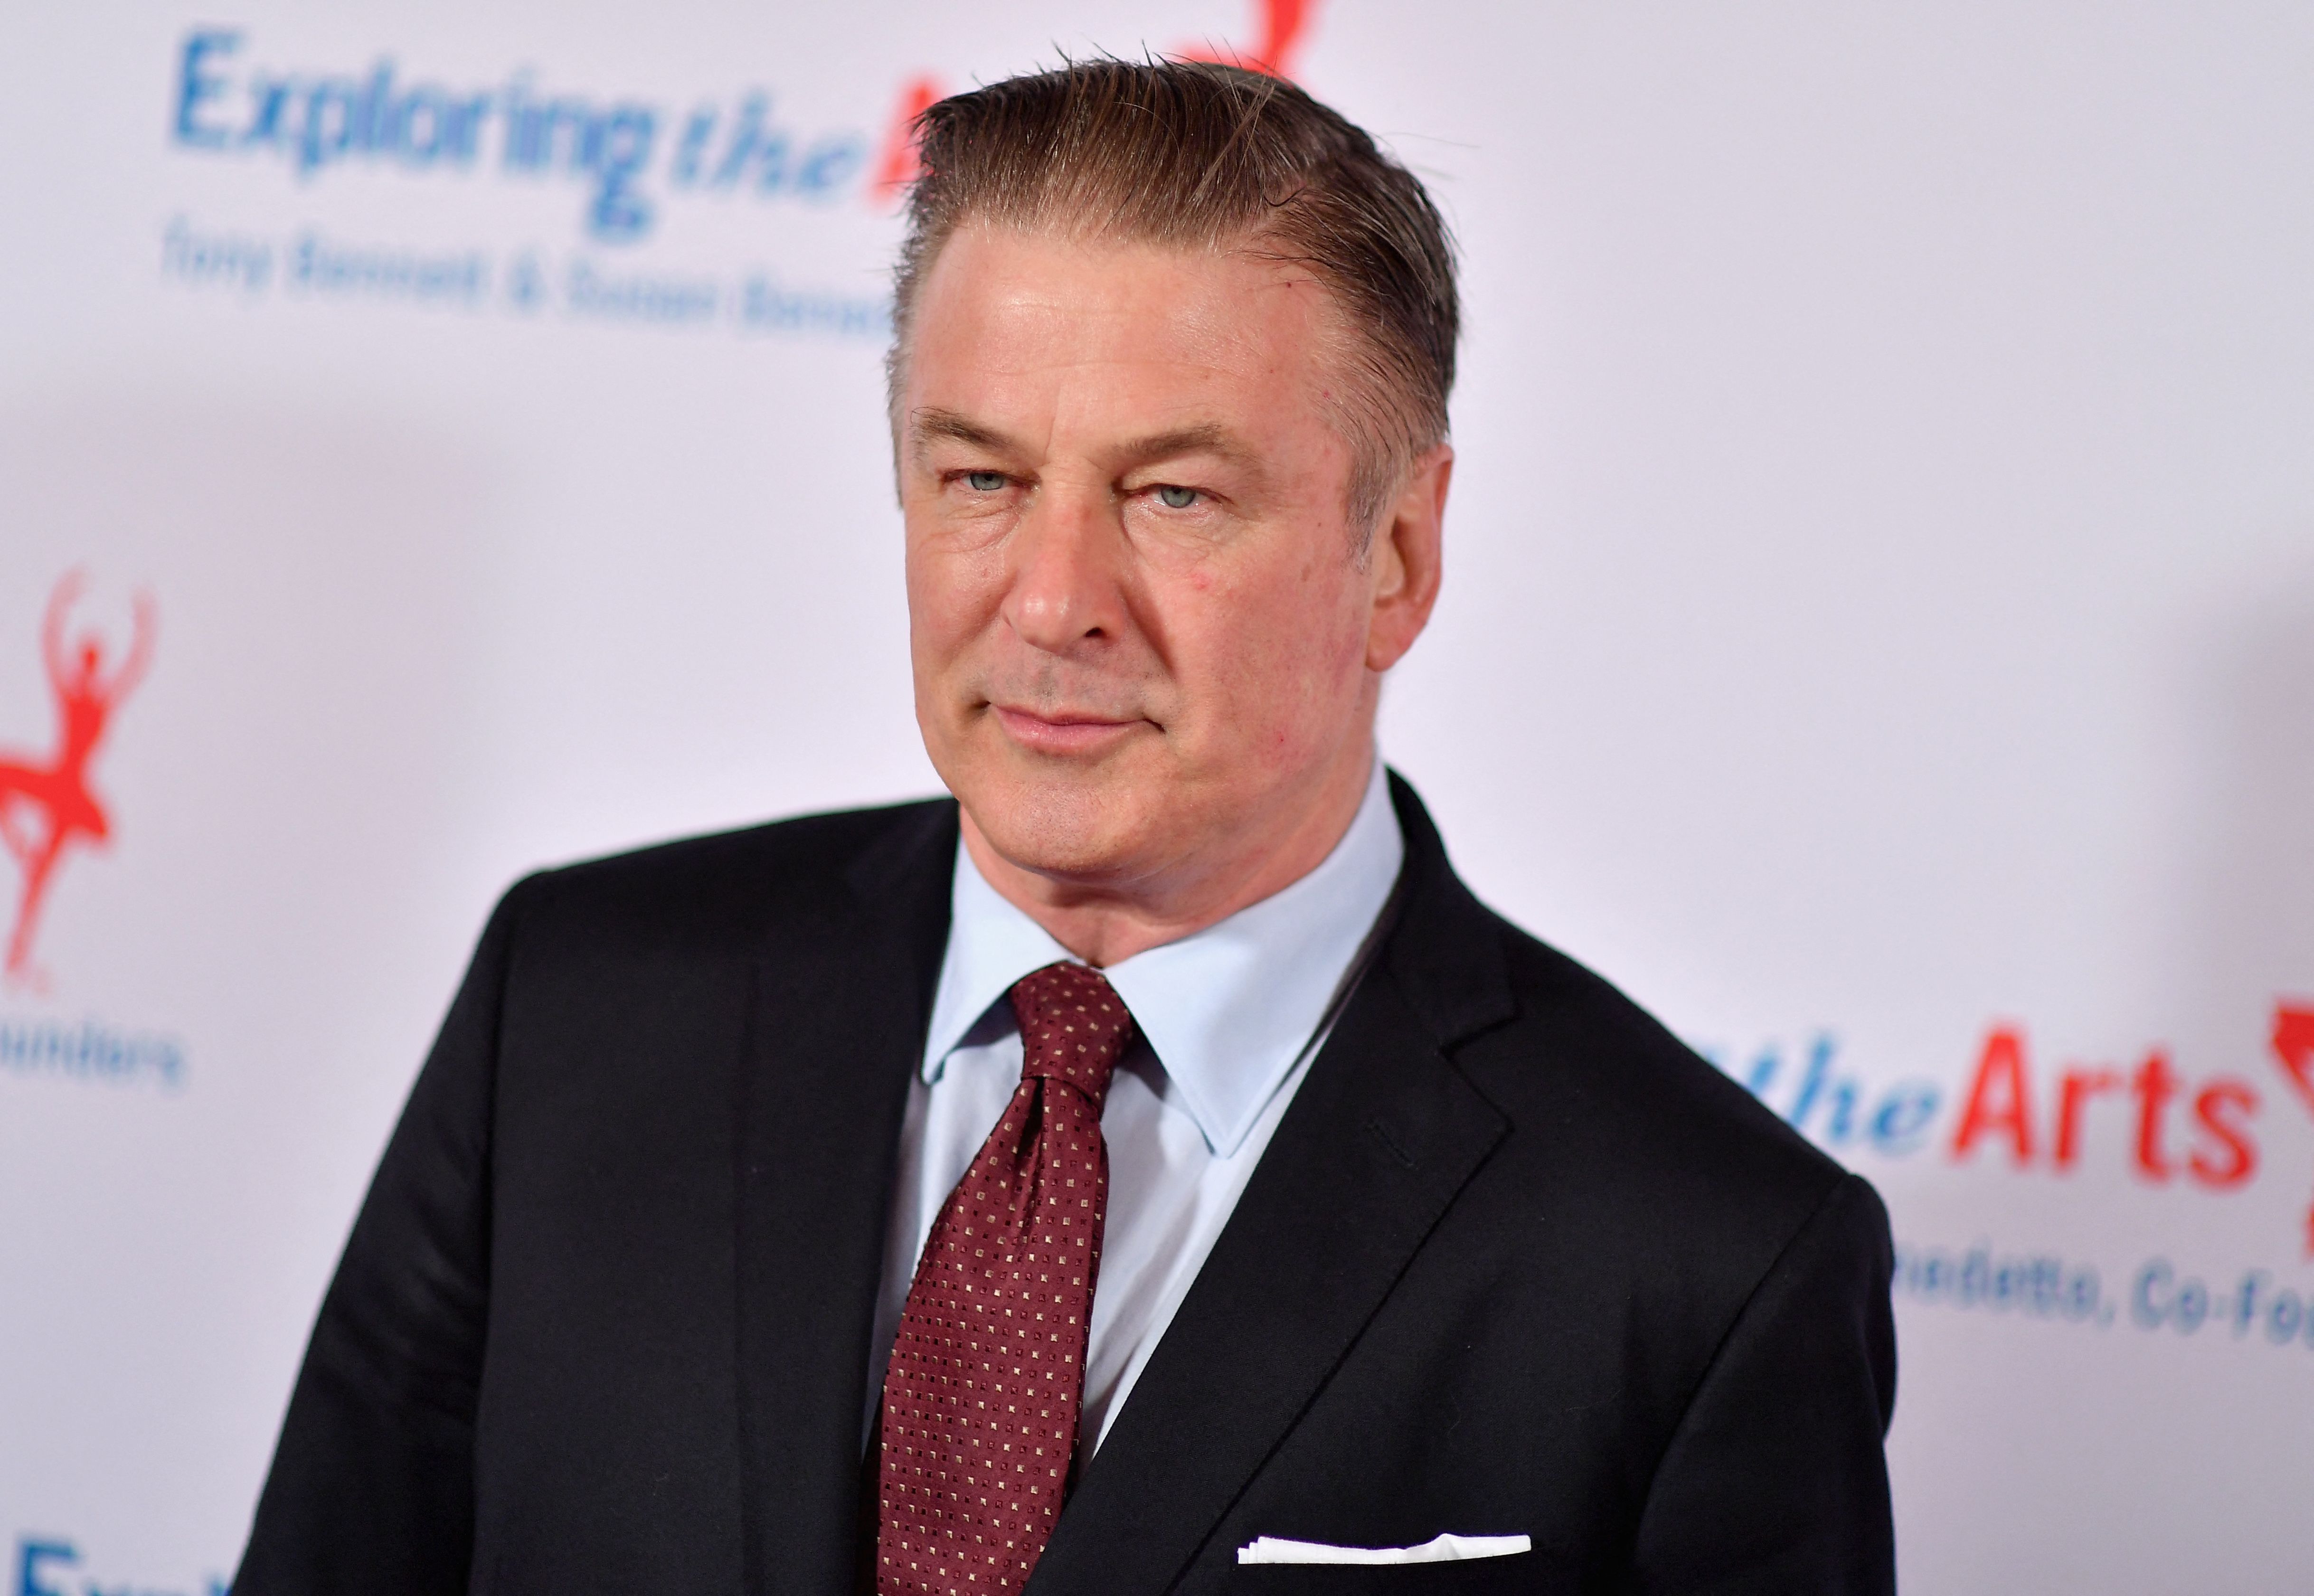 In this April 12, 2019 file photo, Alec Baldwin attends the “Exploring the Arts” 20th anniversary Gala at the Hammerstein Ballroom in New York City.